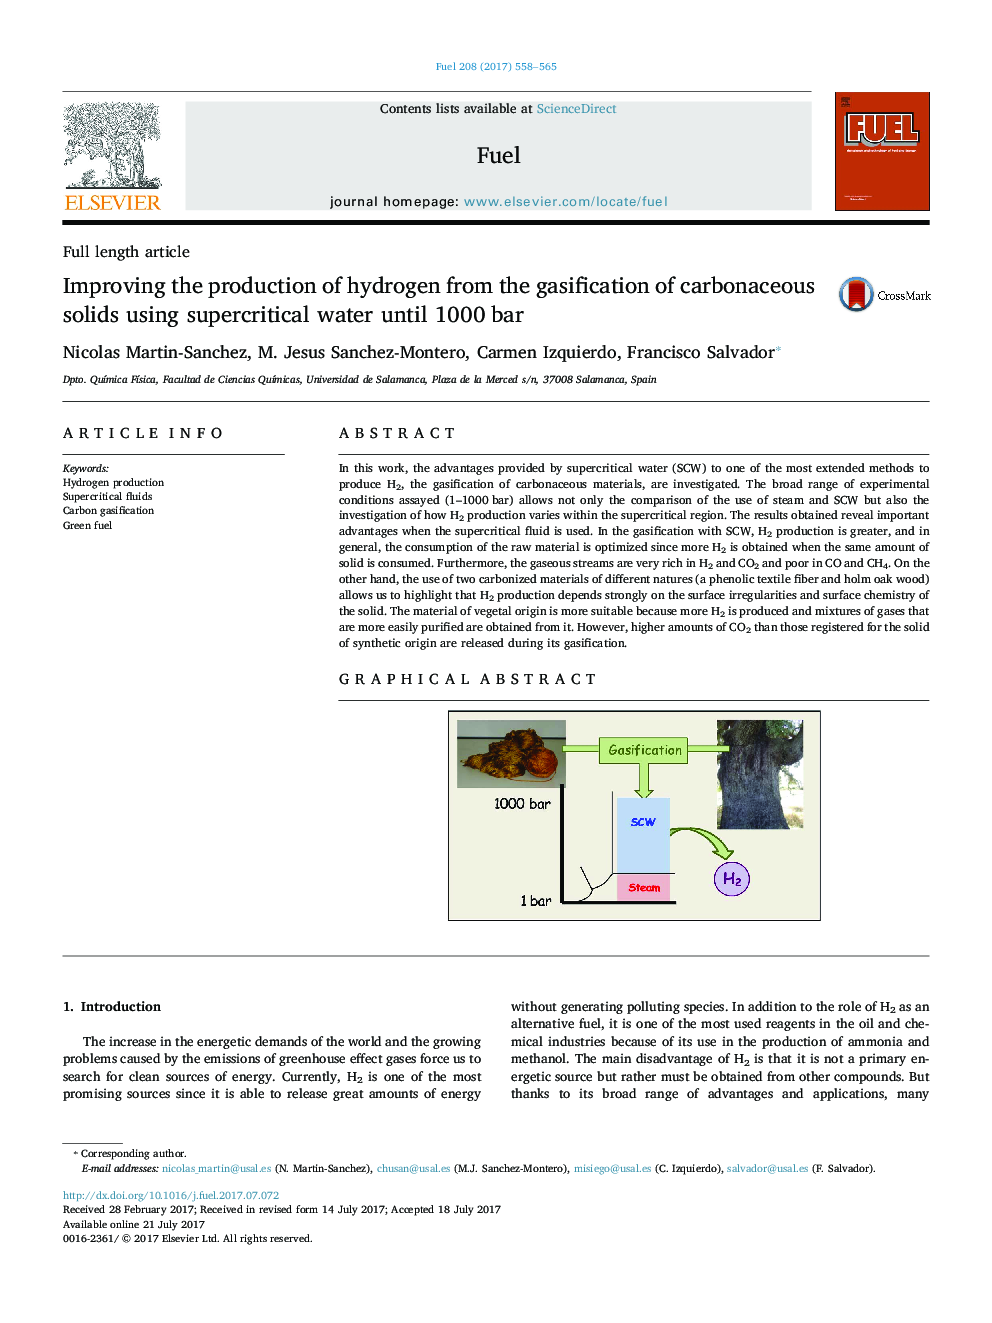 Improving the production of hydrogen from the gasification of carbonaceous solids using supercritical water until 1000 bar